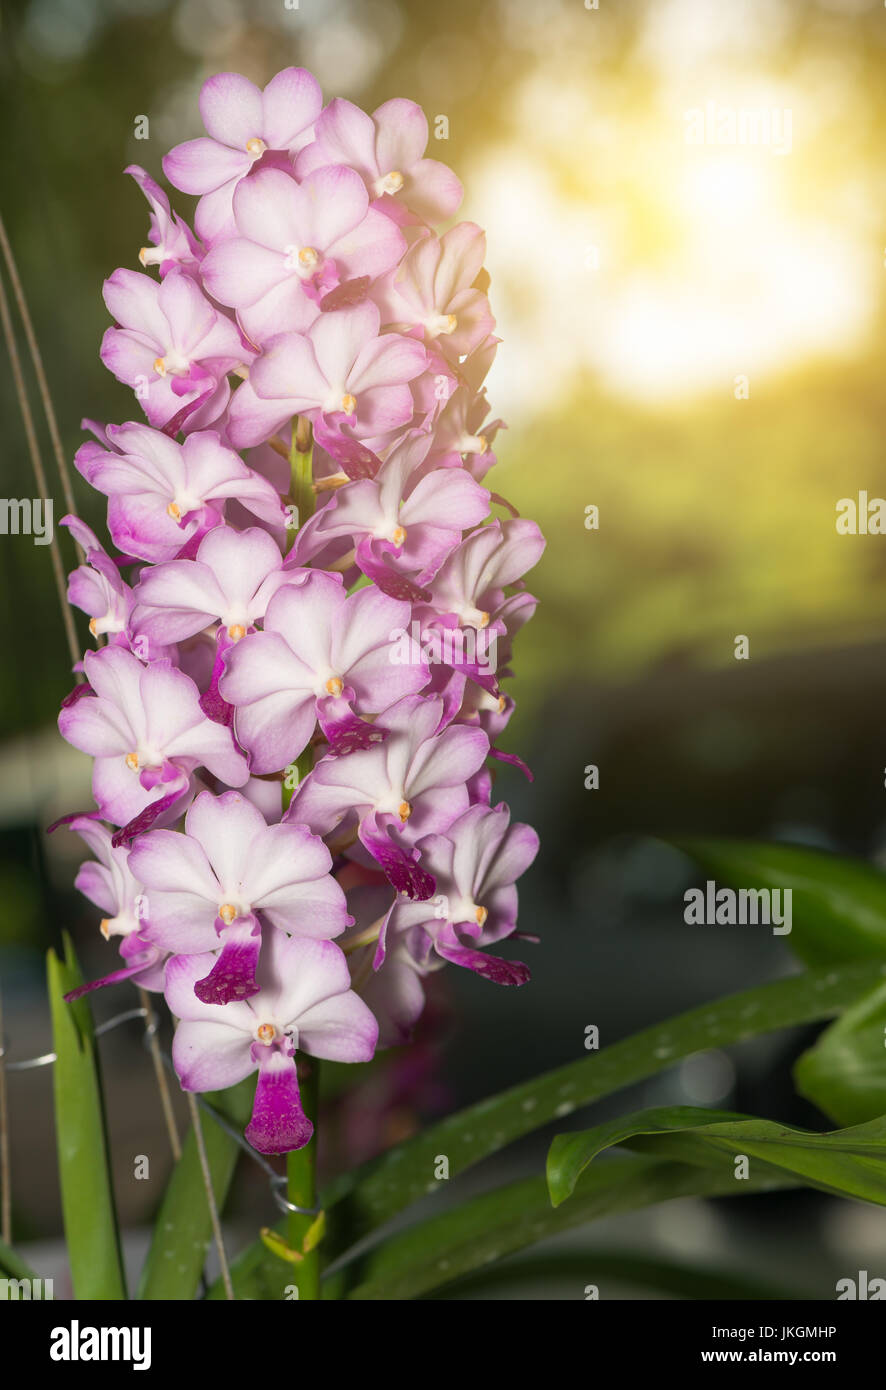 Hybrid pink Vanda orchid on nature background with sunlight Stock Photo